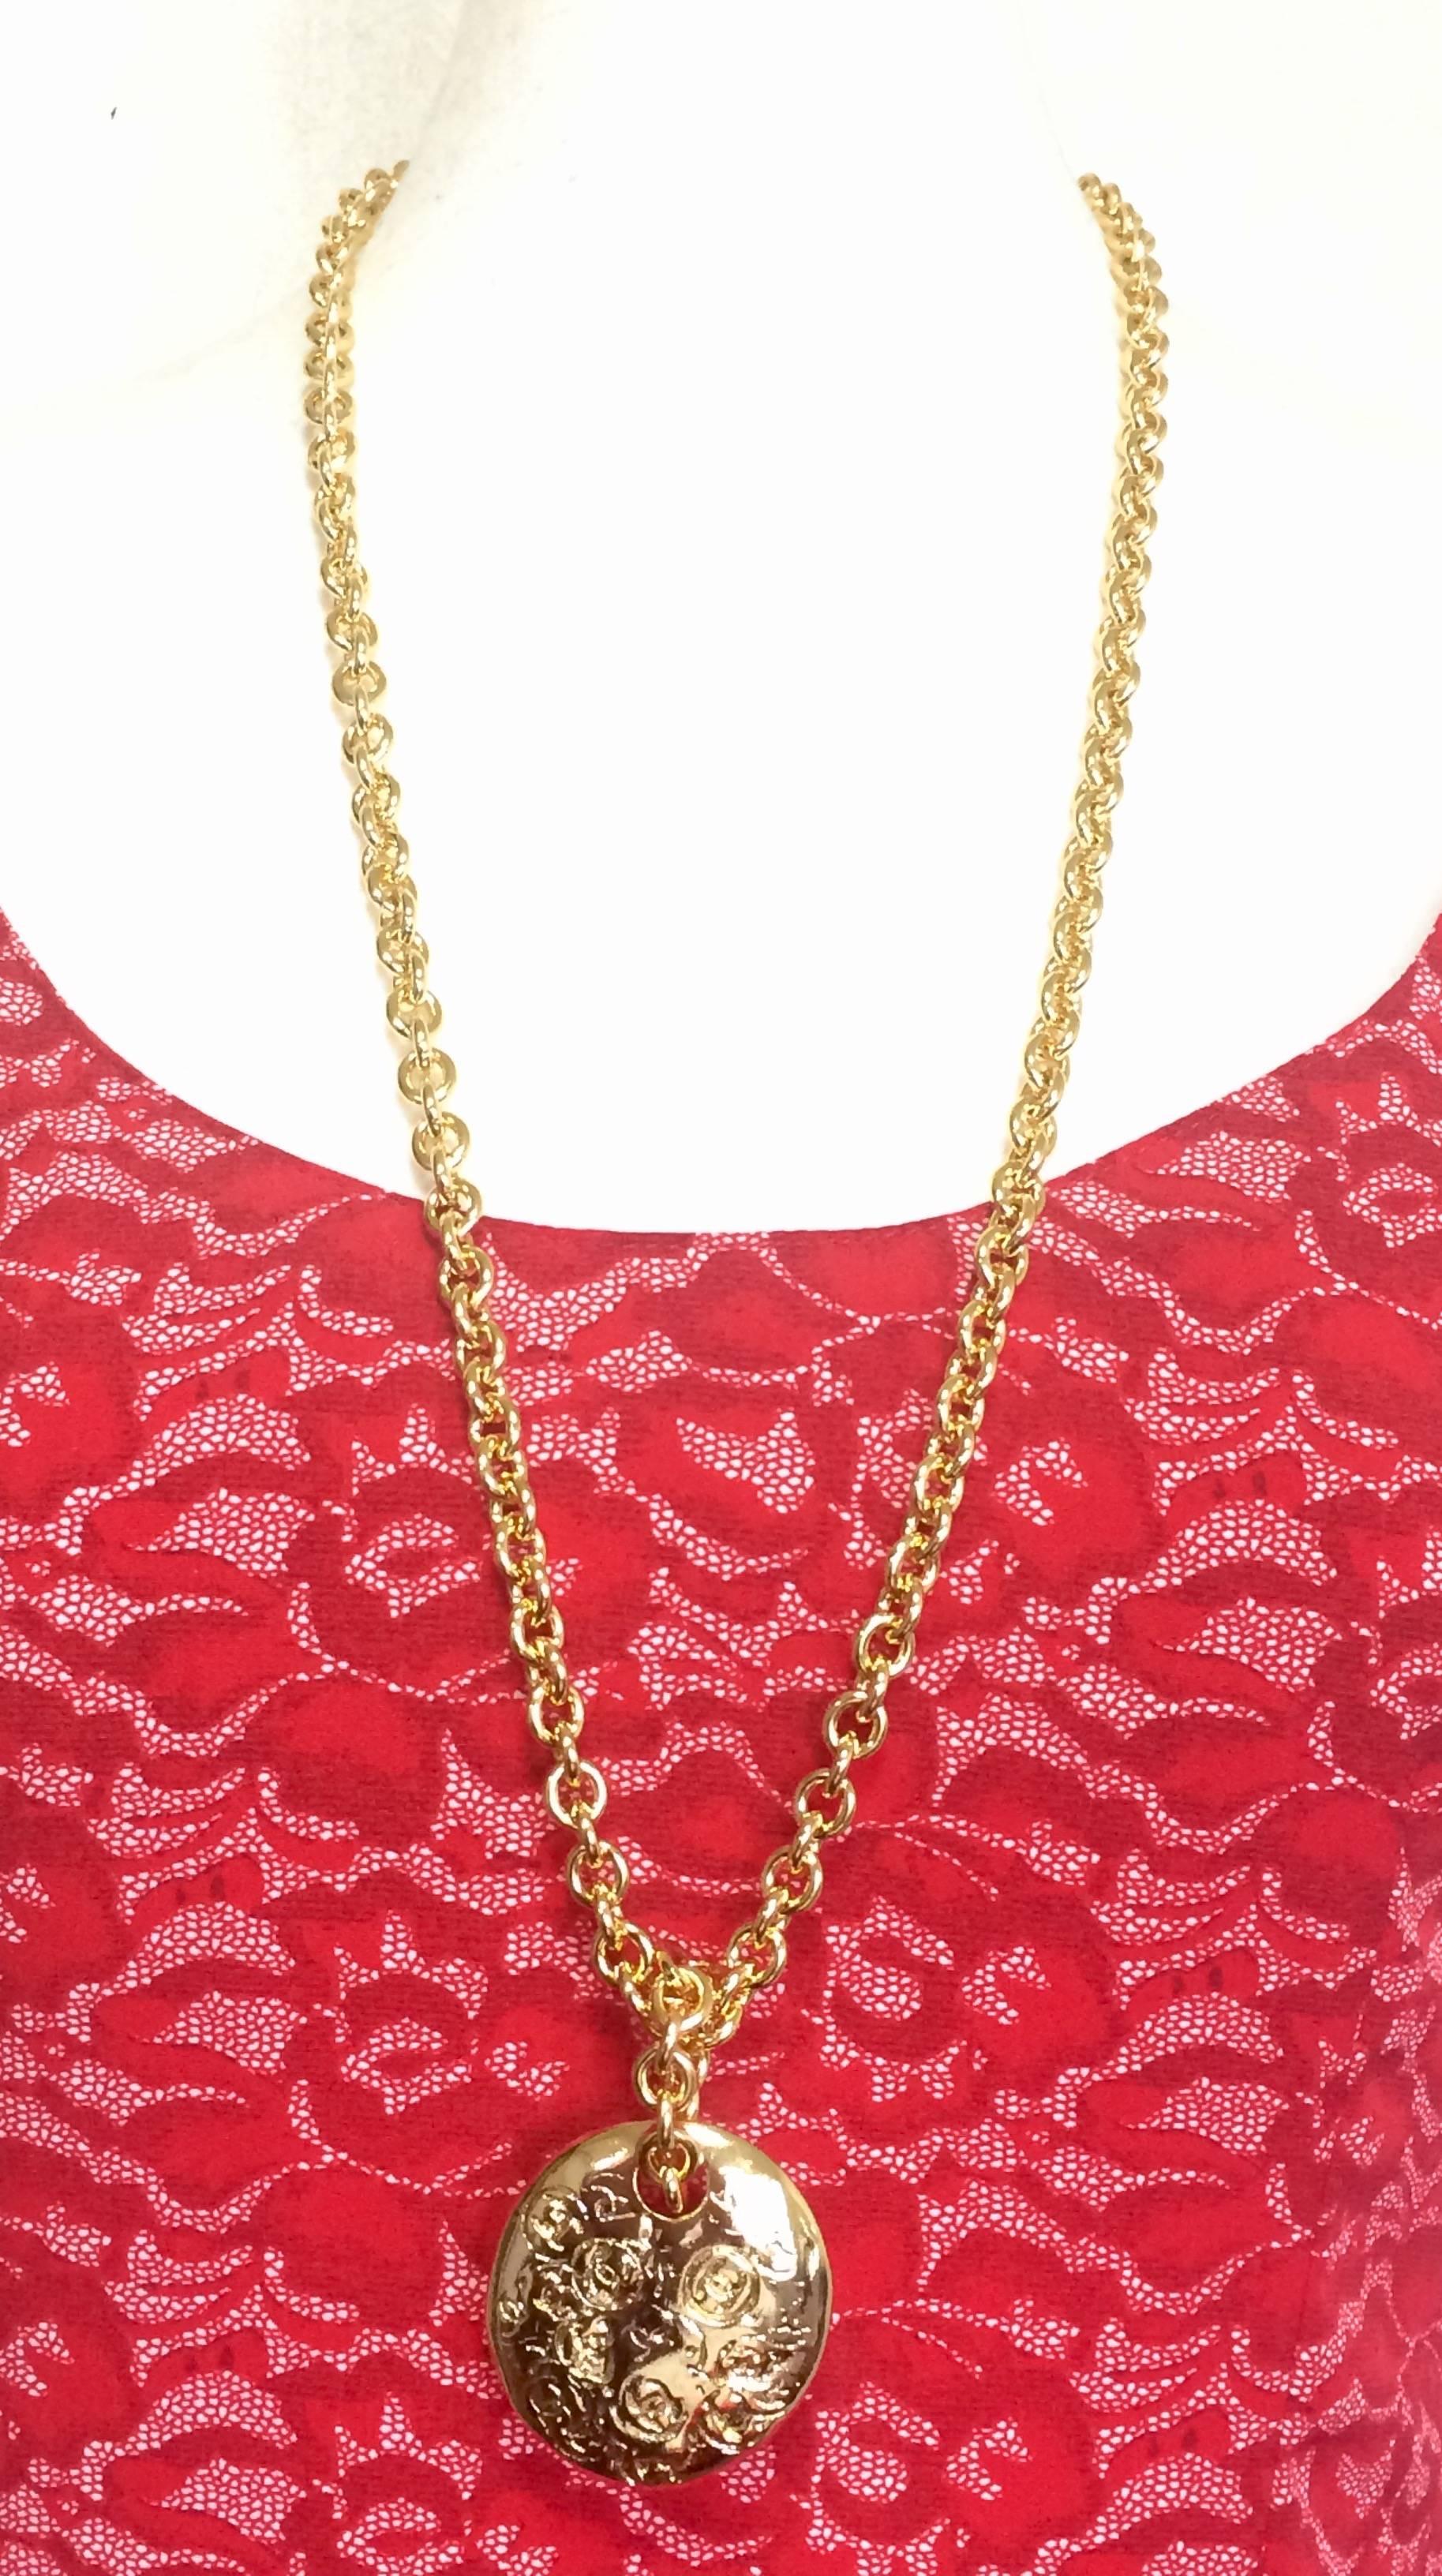 1990s. MINT. Vintage CHANEL golden long chain necklace with round coin, medal shape pendant top with randomly embossed cc. Rare Chanel jewelry.

MINT/Excellent condition!!
Great gift idea. Free gift wrapping.  

Introducing another hard-to-find long